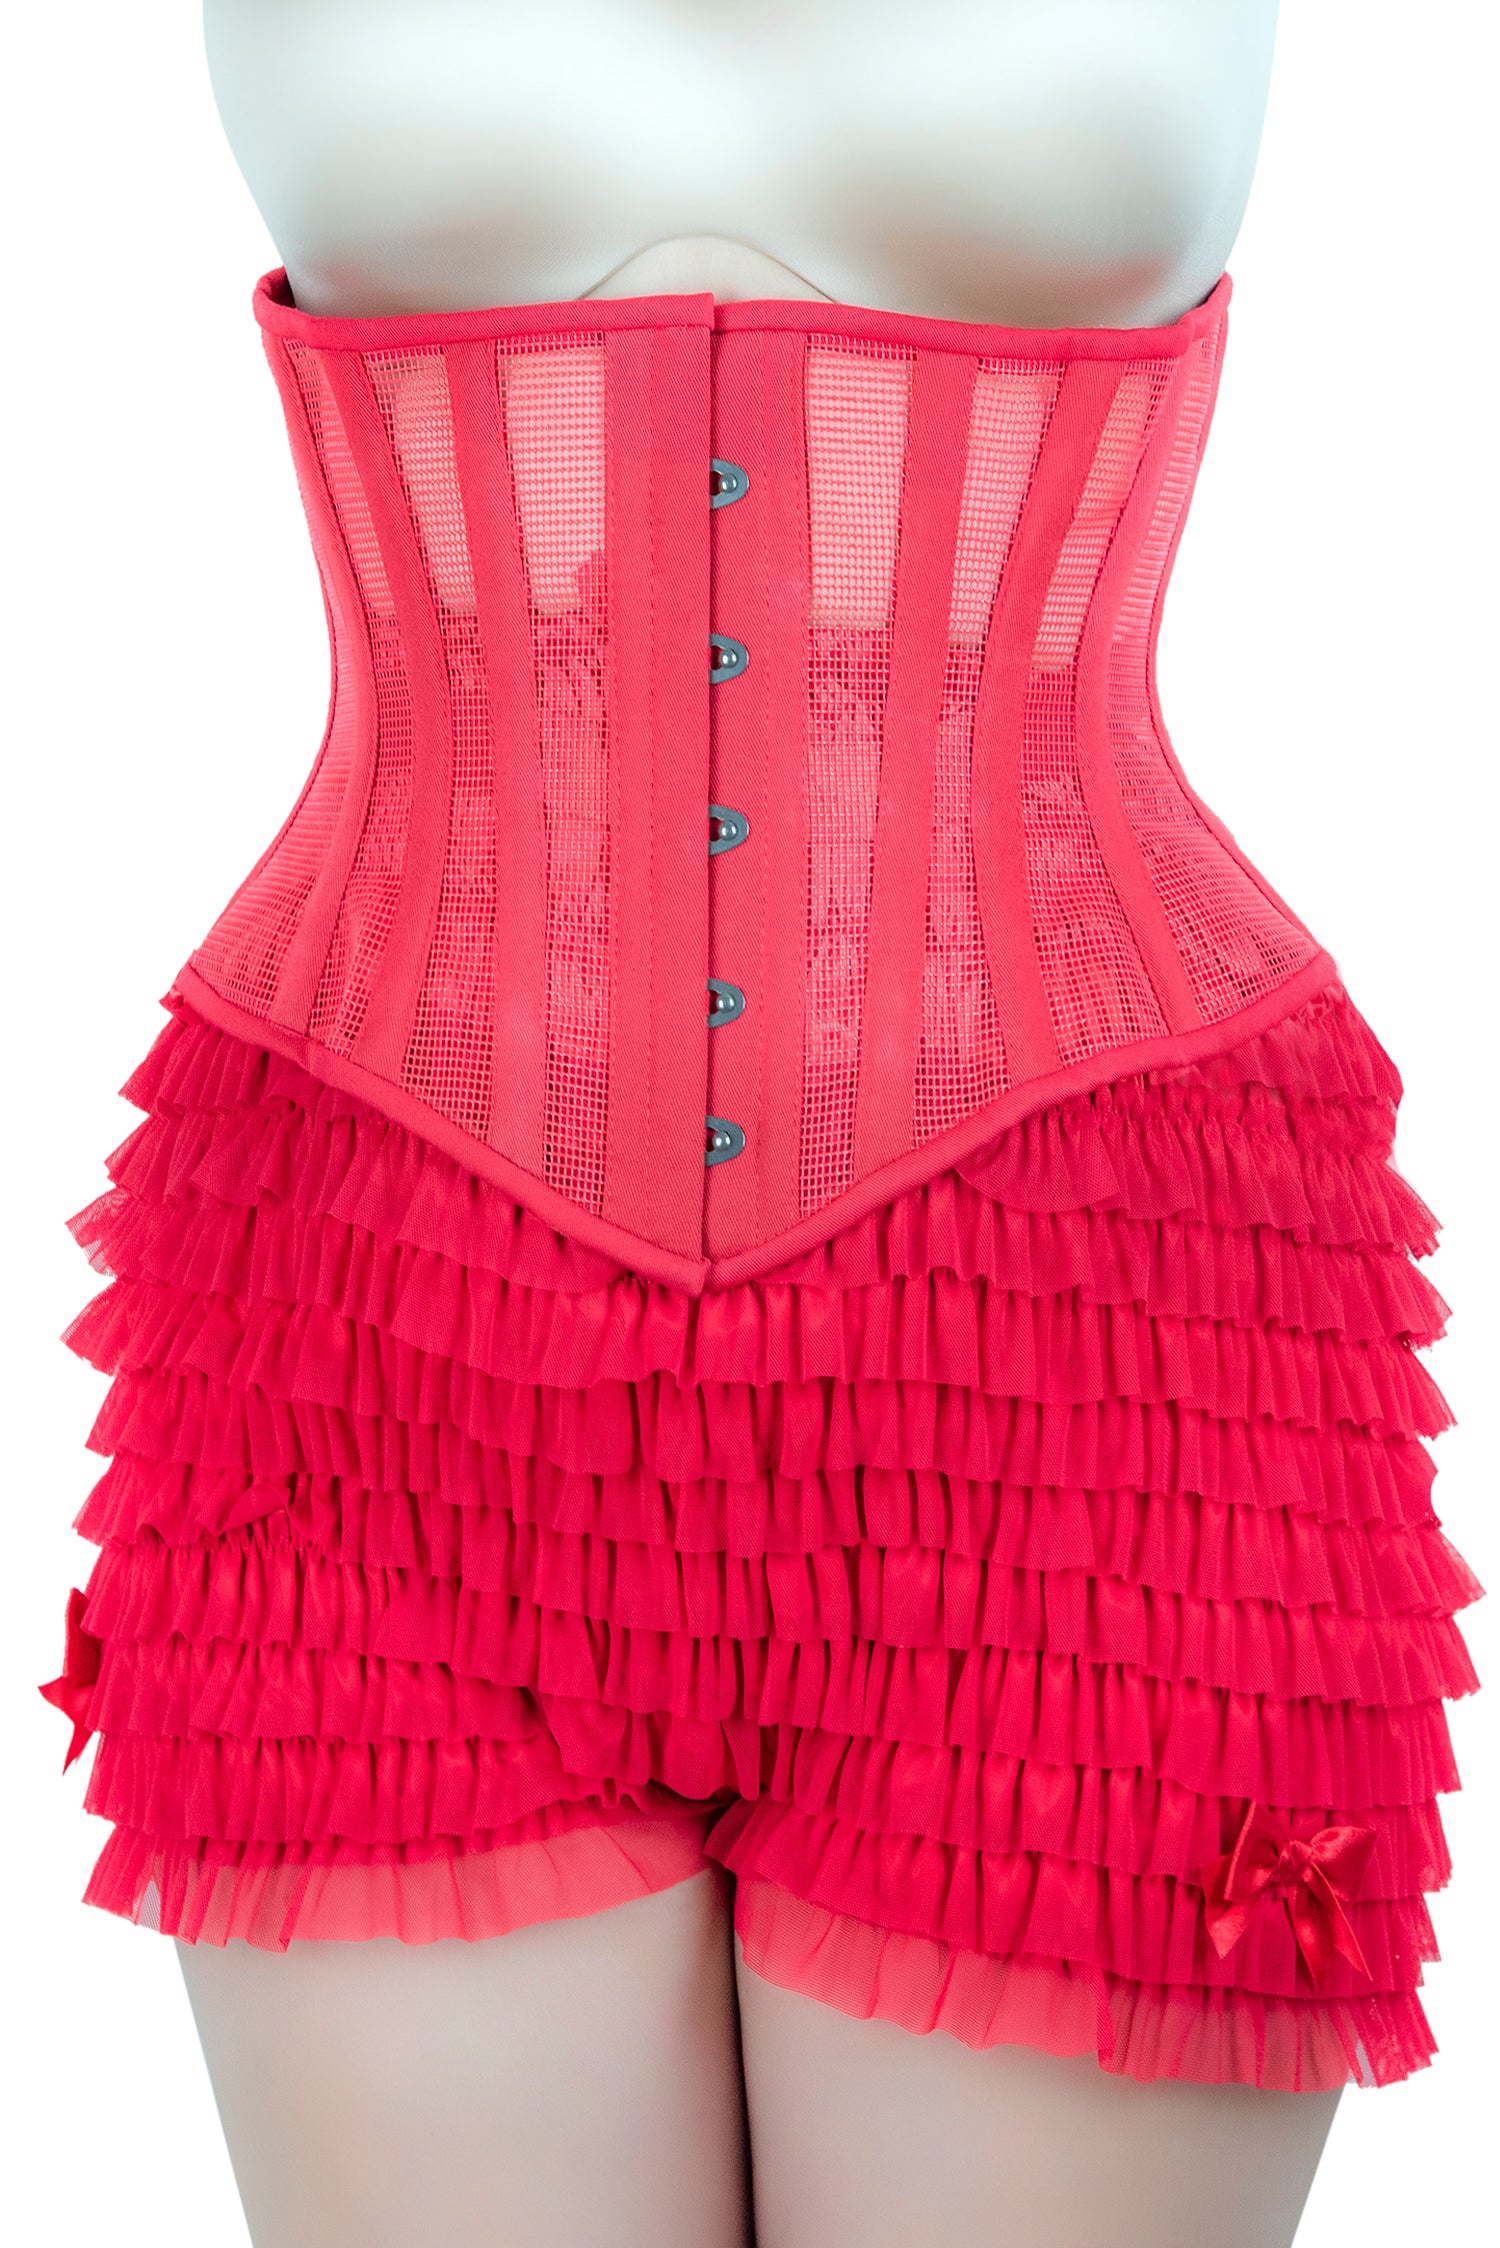 Sold out - Lola Underbust Red Mesh Corset